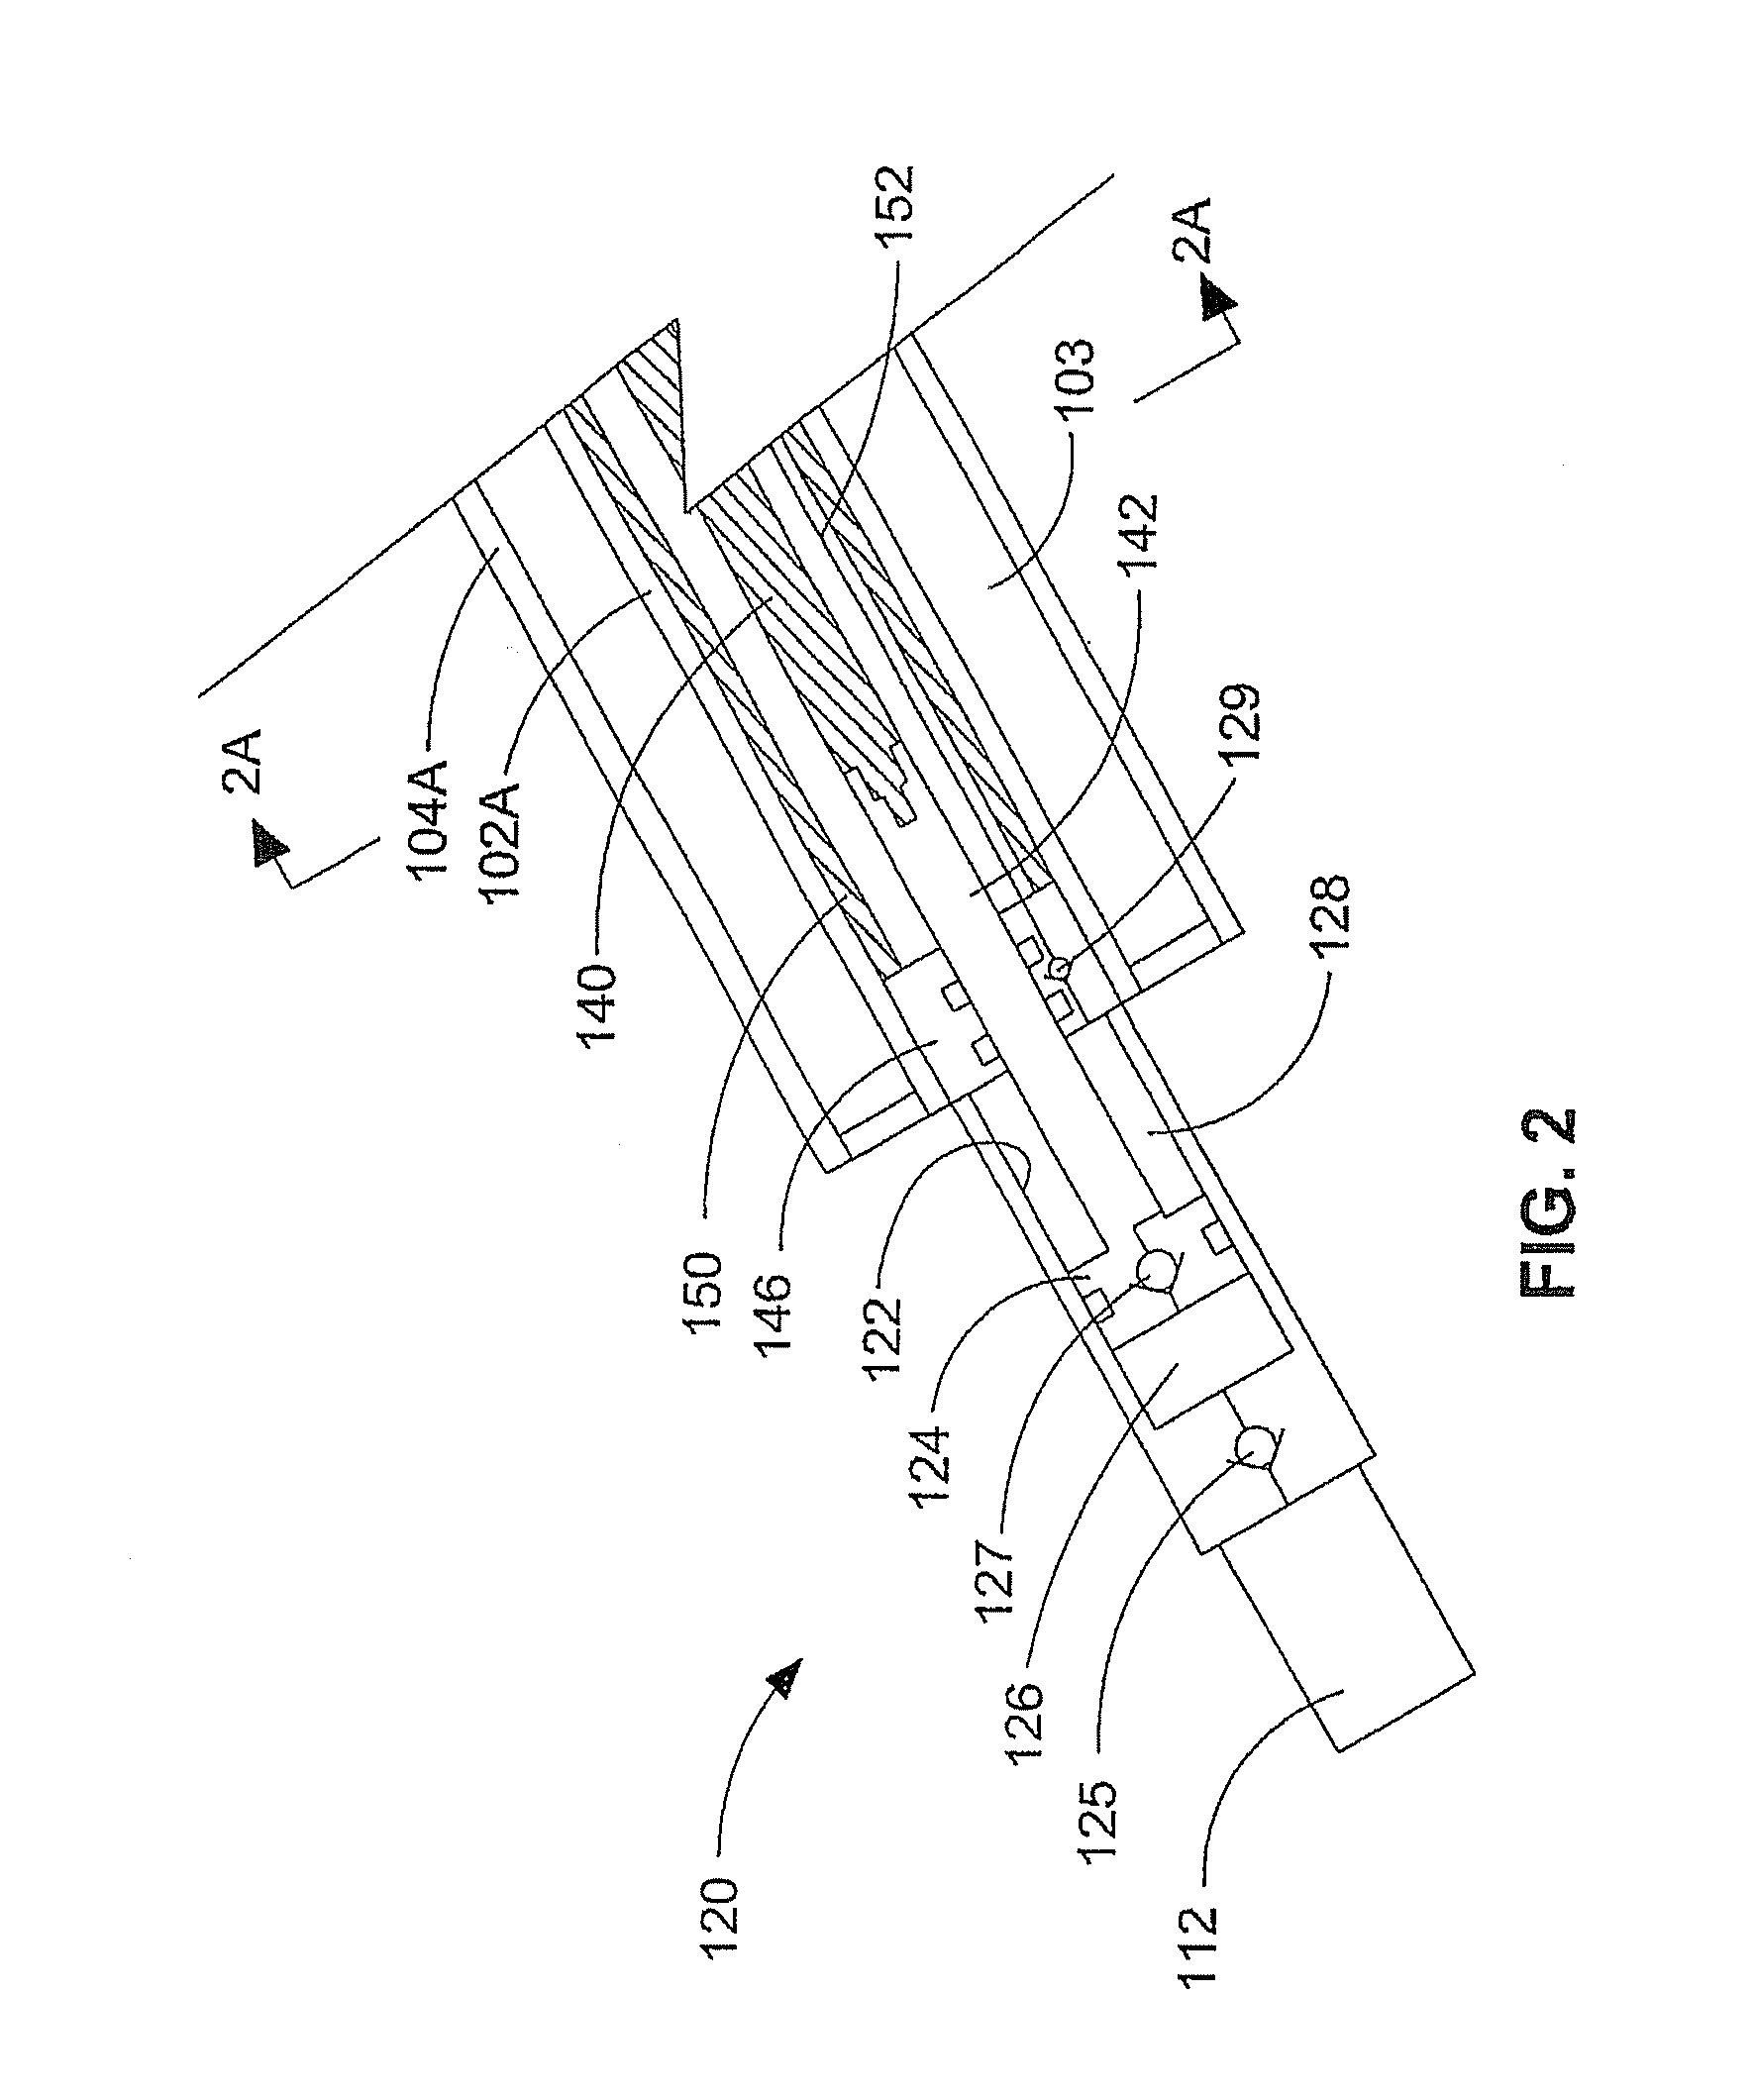 Apparatus And Method For Holding A Cryogenic Fluid And Removing Cryogenic Fluid Therefrom With Reduced Heat Leak